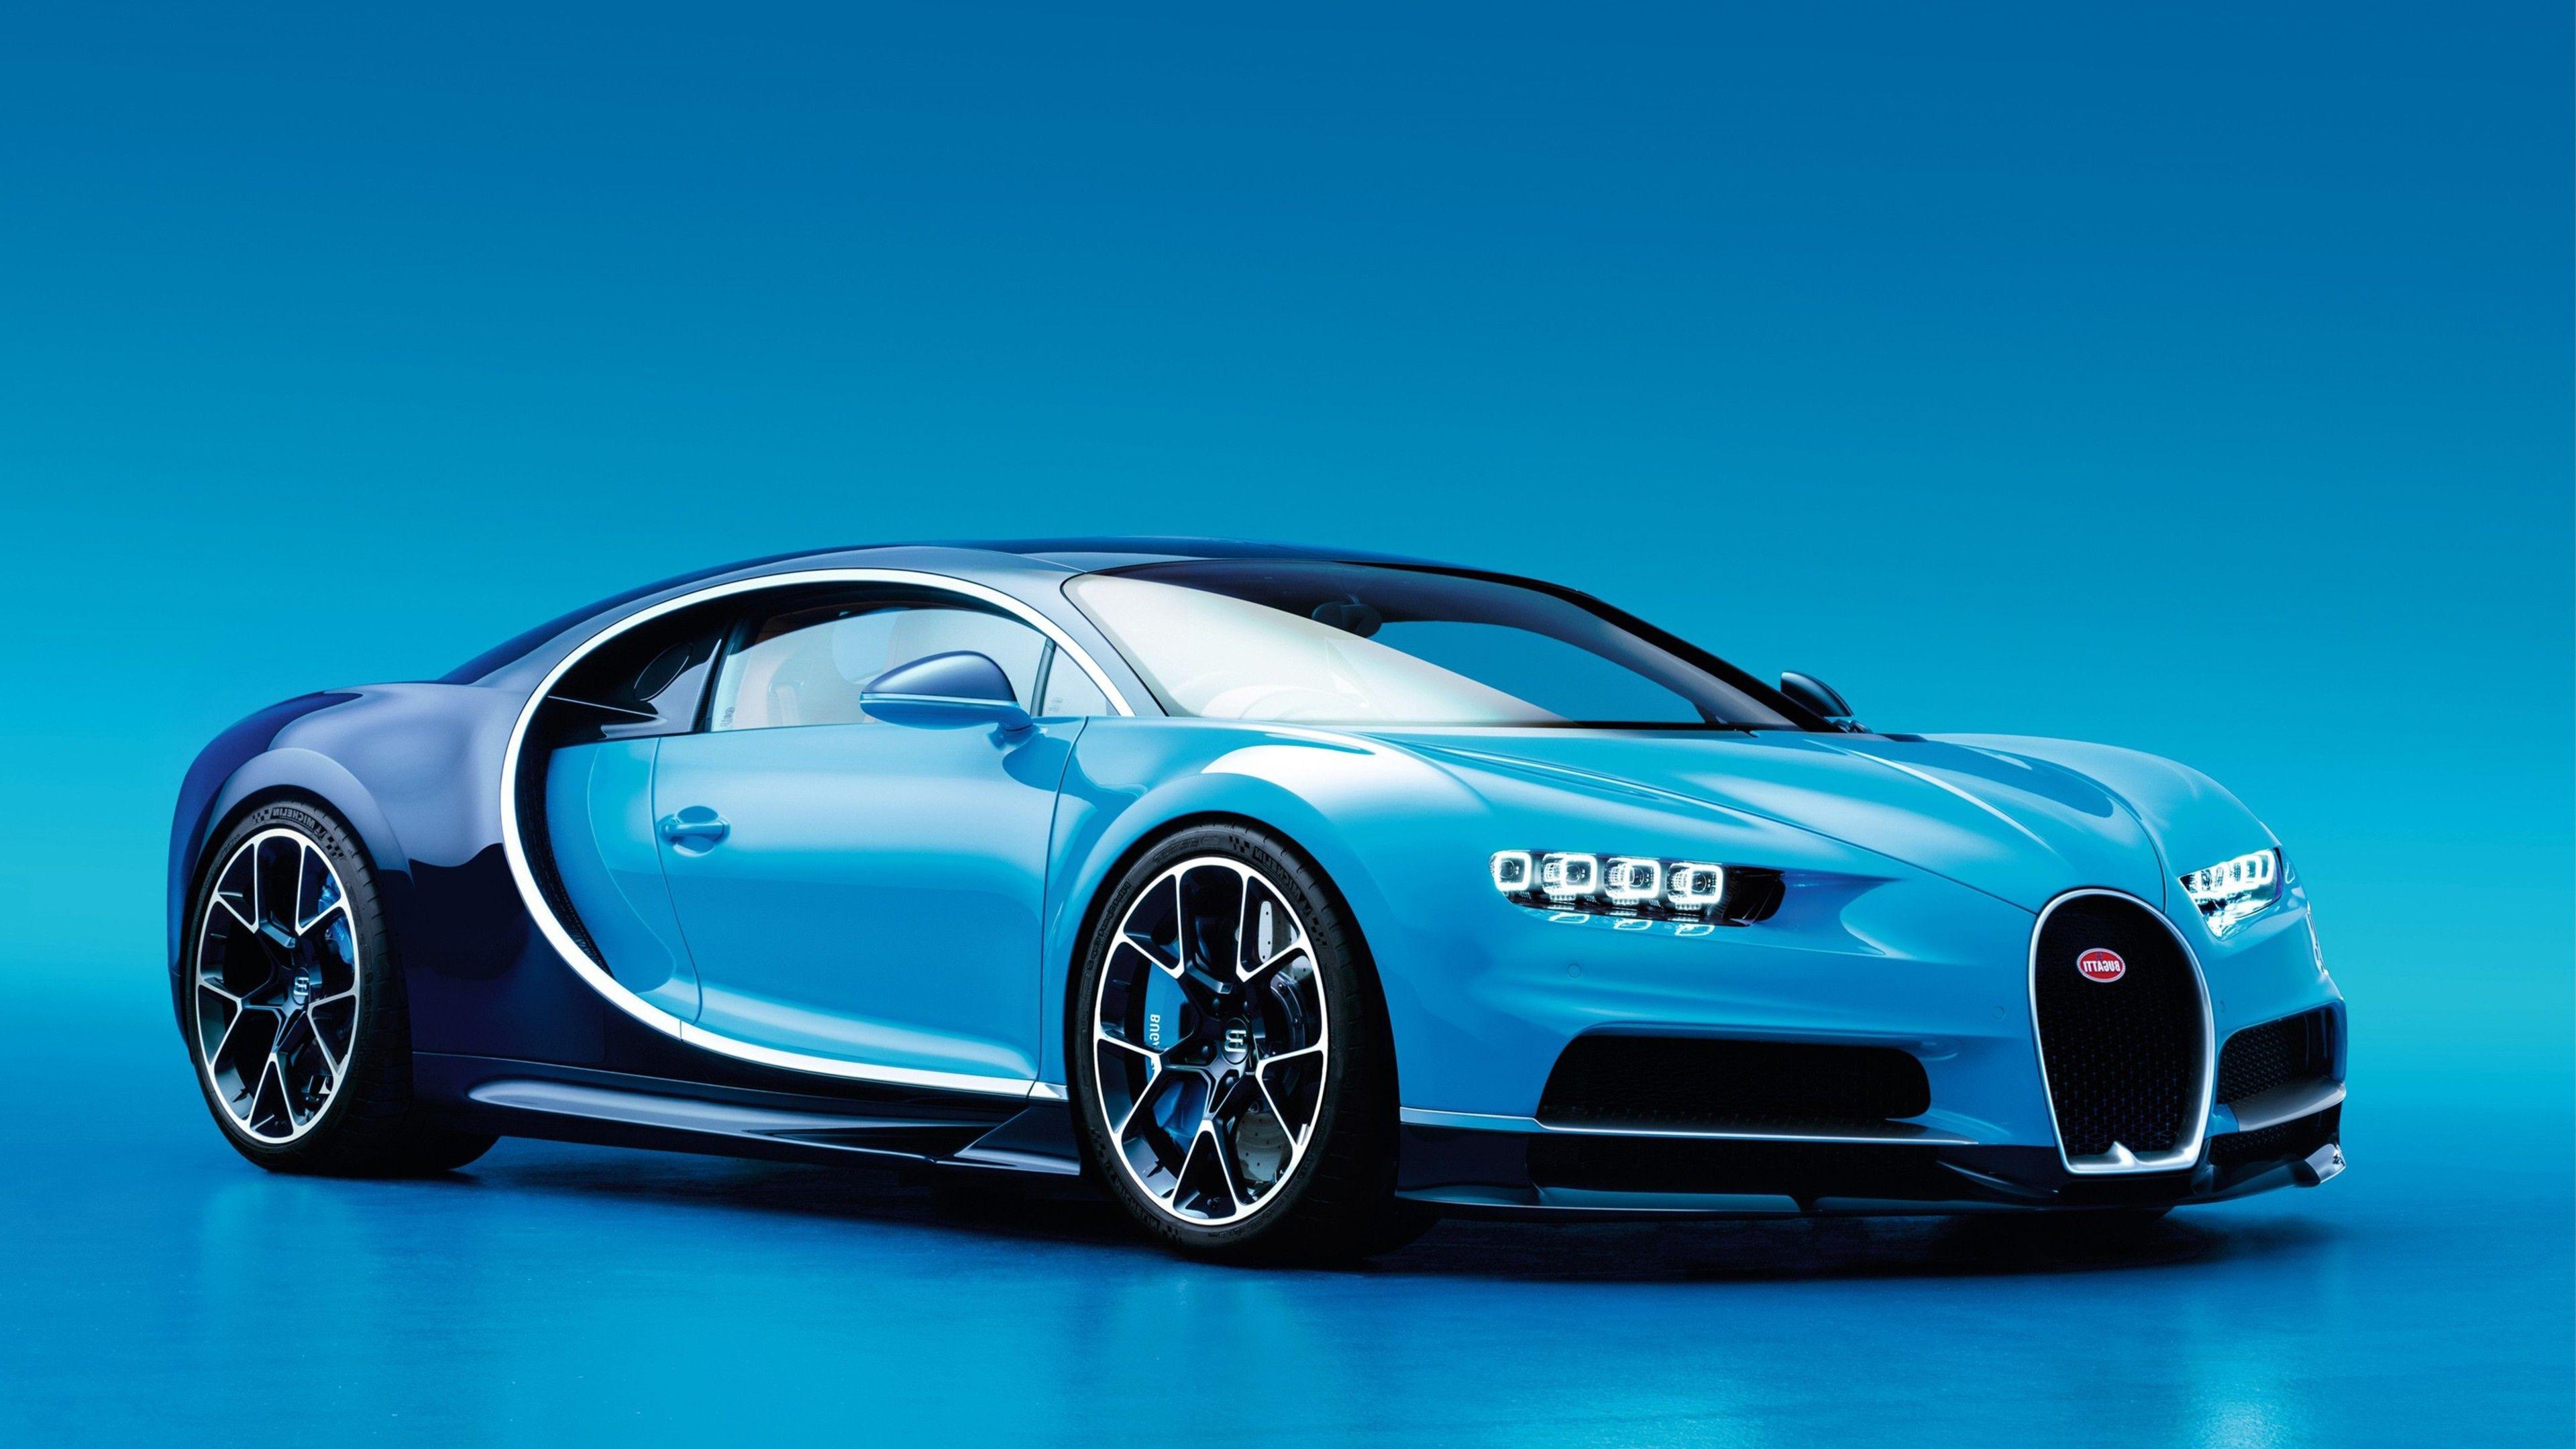 The Bugatti Chiron Qualifies as a Great Daily Driver